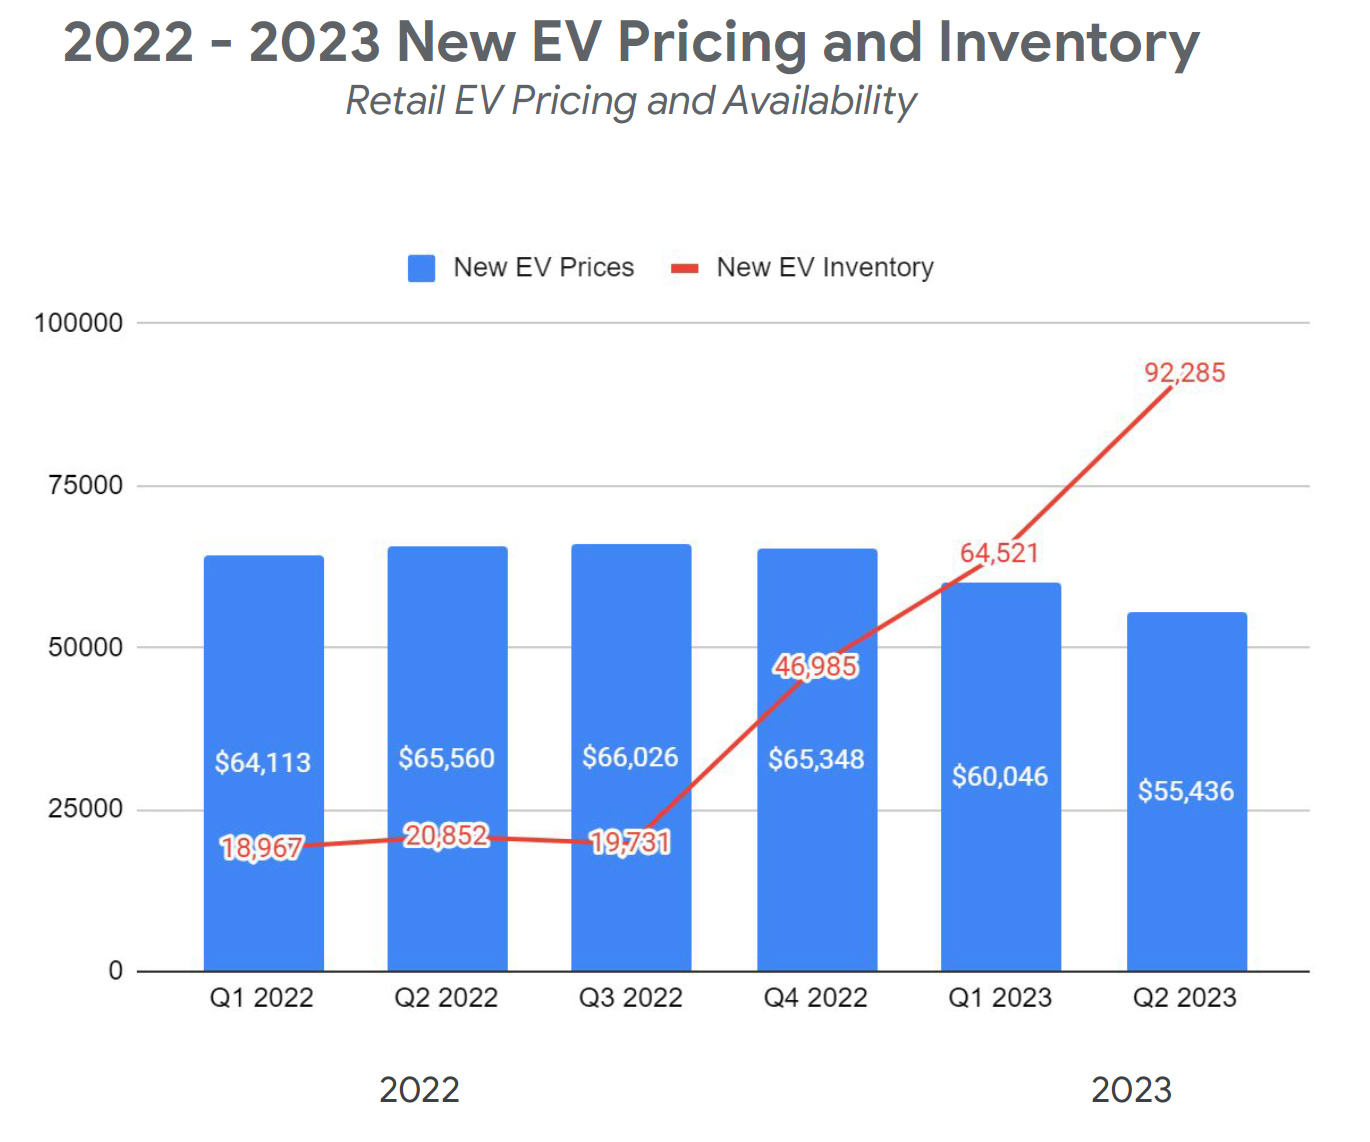 2022 - 2023 New EV Pricing and Inventory Graph - Trends and Developments in Electric Vehicle Markets